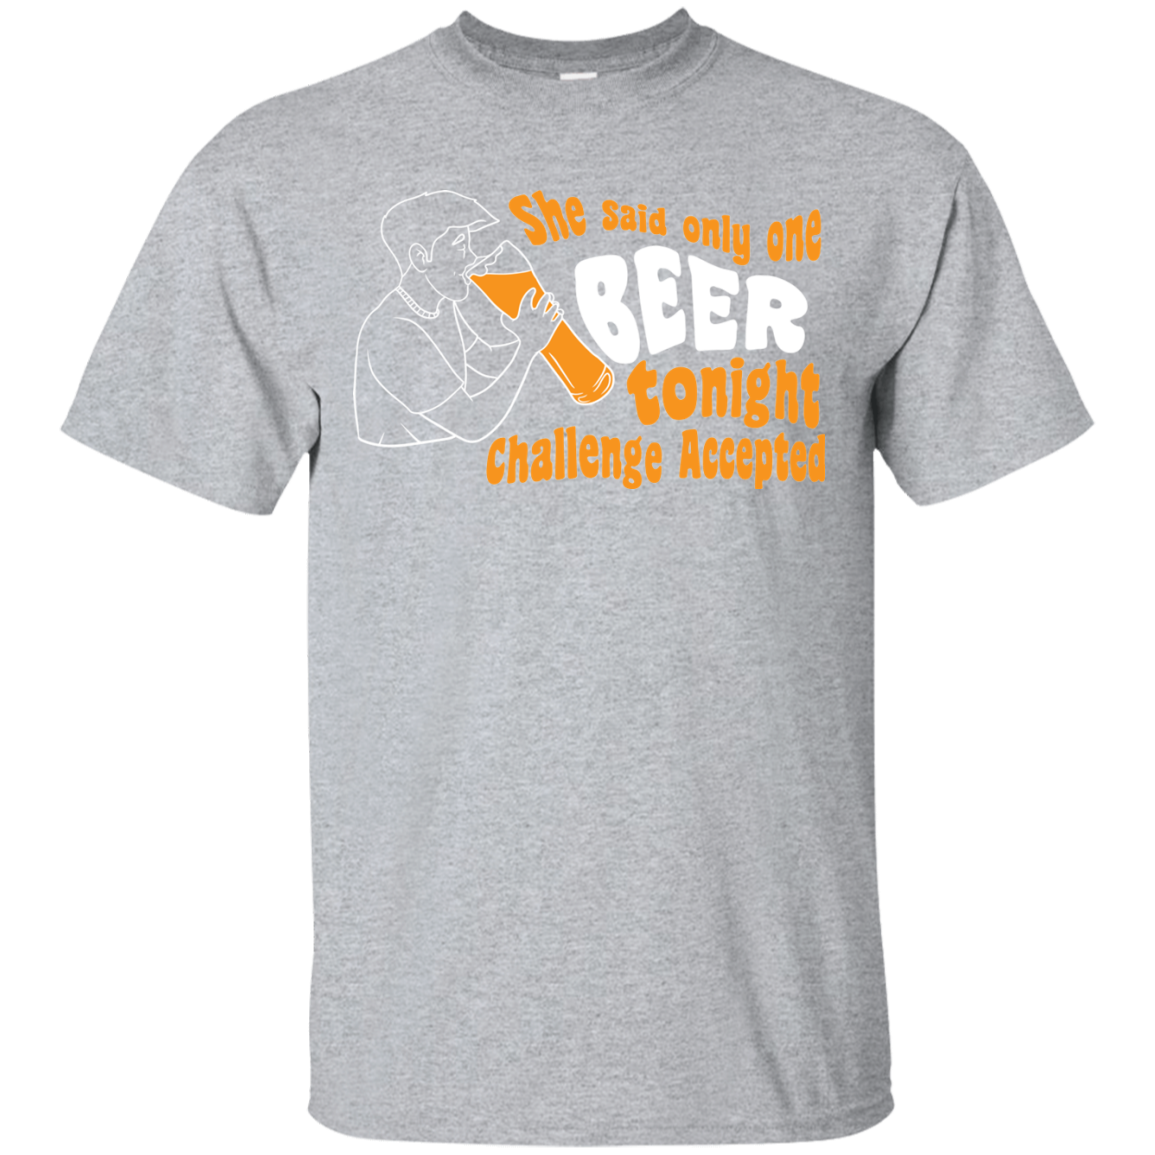 One Beer Challenge T-Shirt Apparel - The Beer Lodge